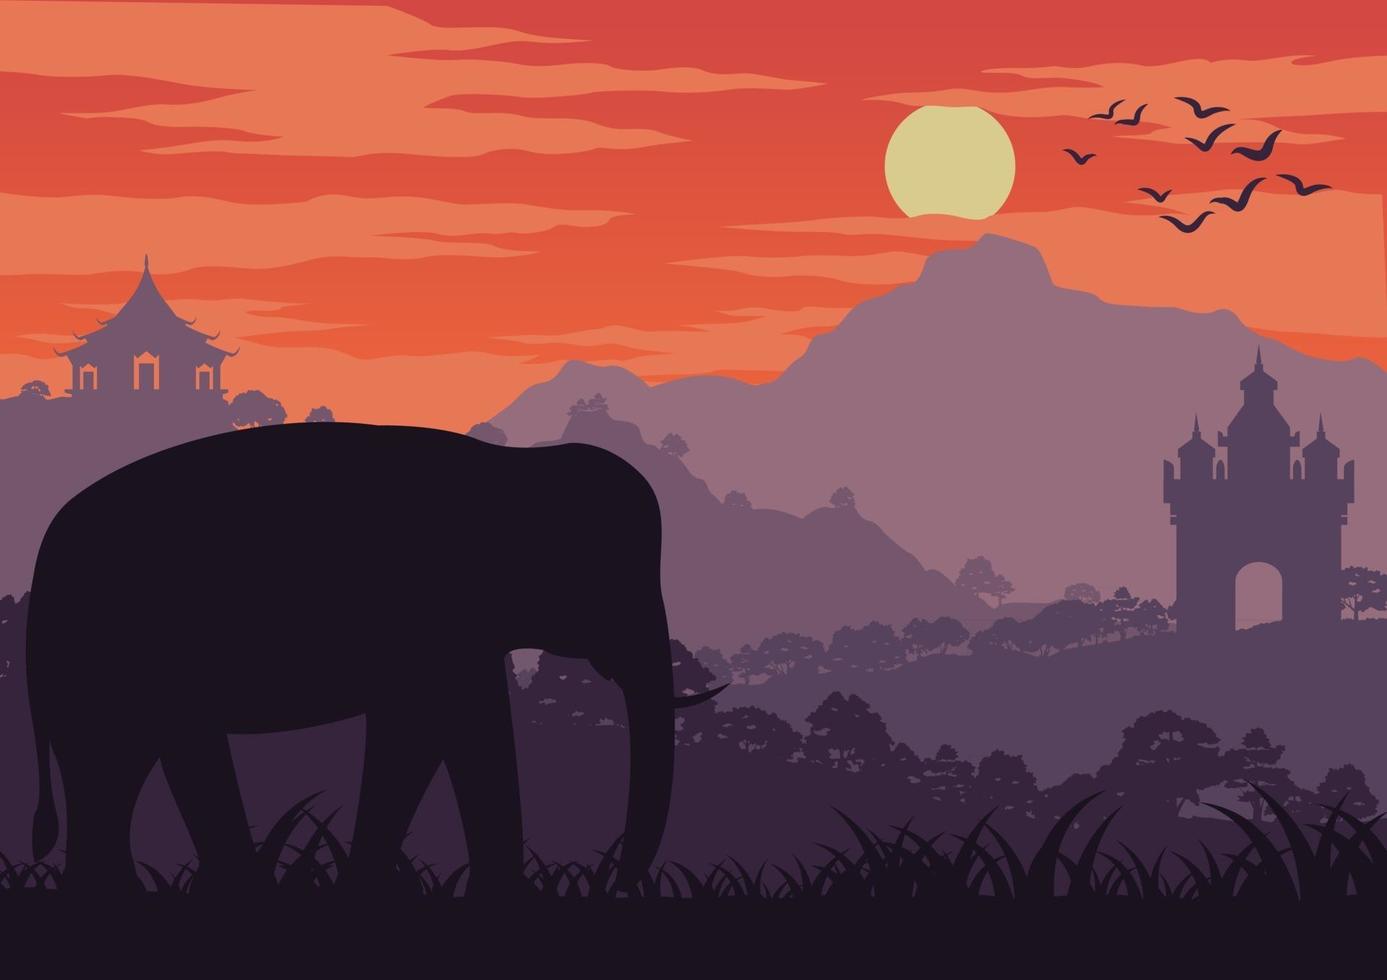 Silhouette of mountain and elephant in Thailand at sunset vector